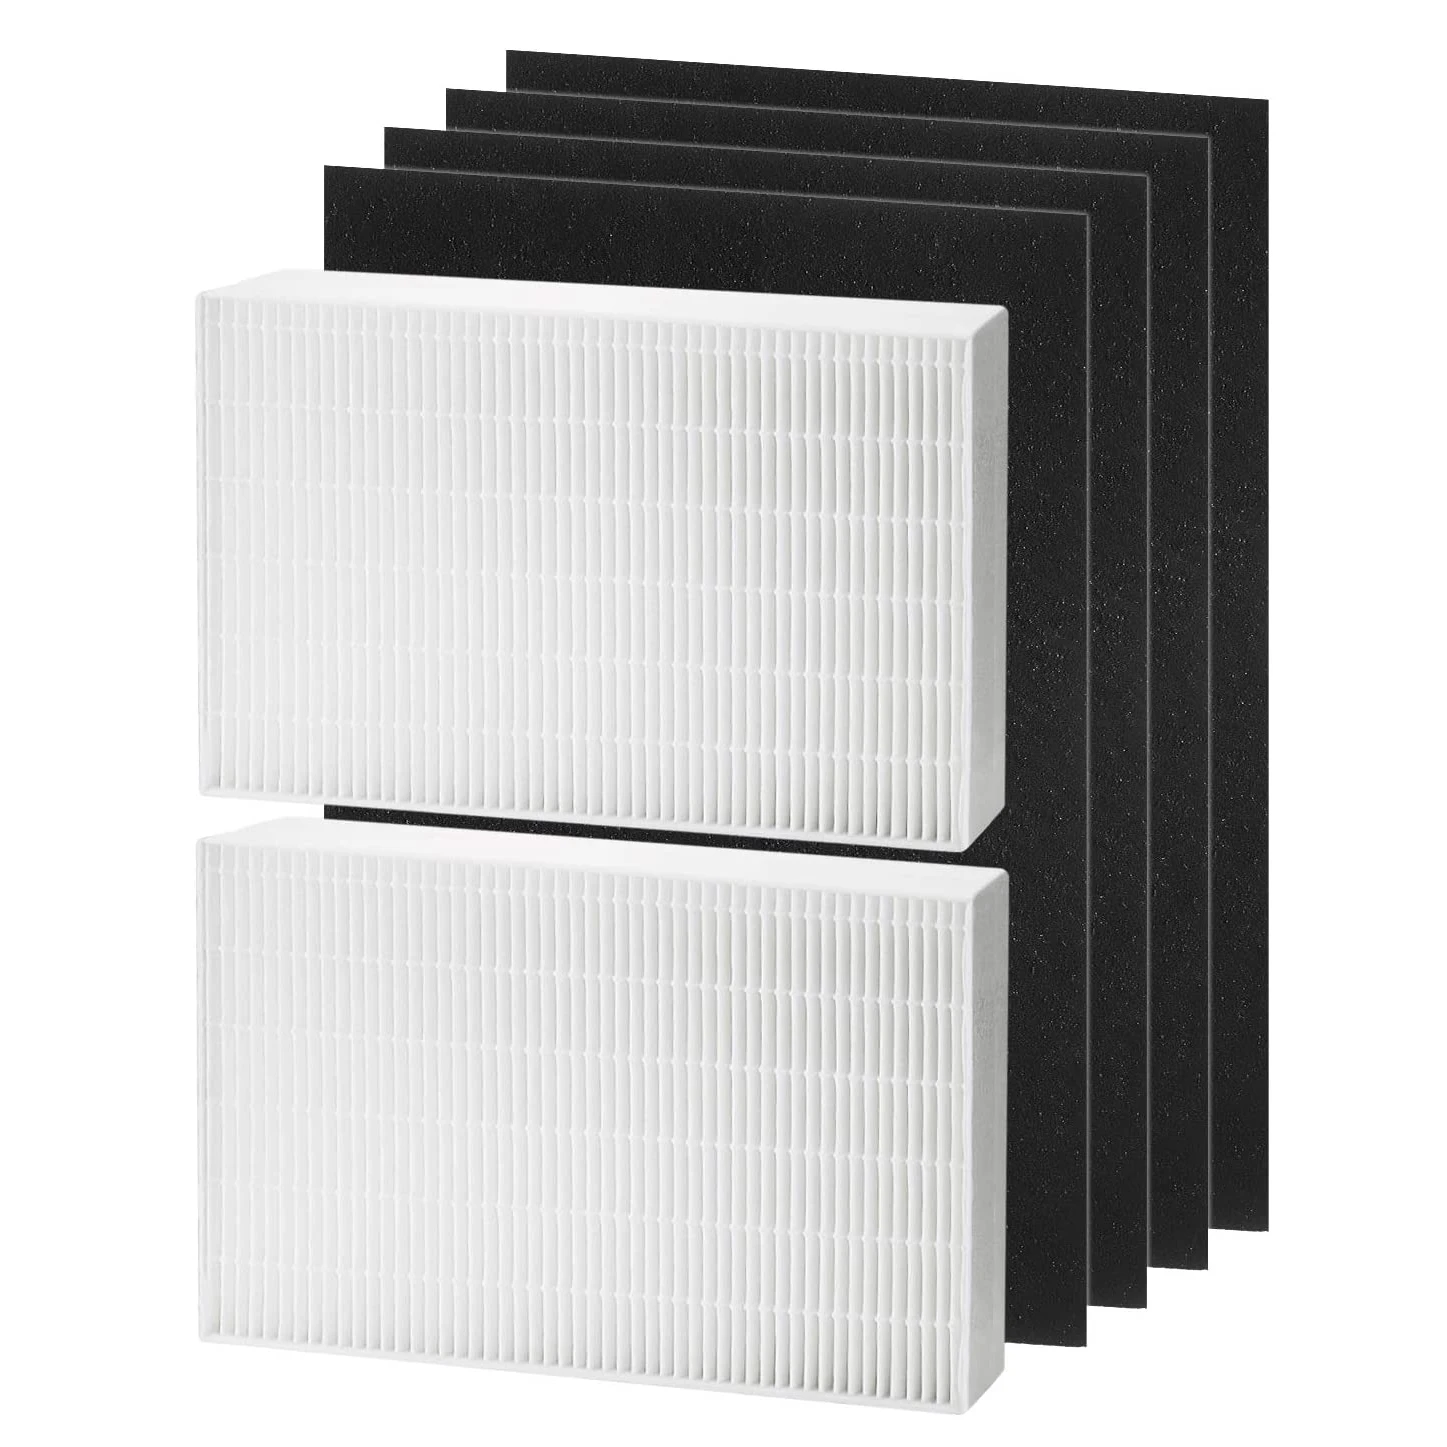 True HEPA  Air Purifier Filter Replacement Compatible with Honeywell HPA200 Series, HPA200, HPA201, HA202, HPA204, HPA250